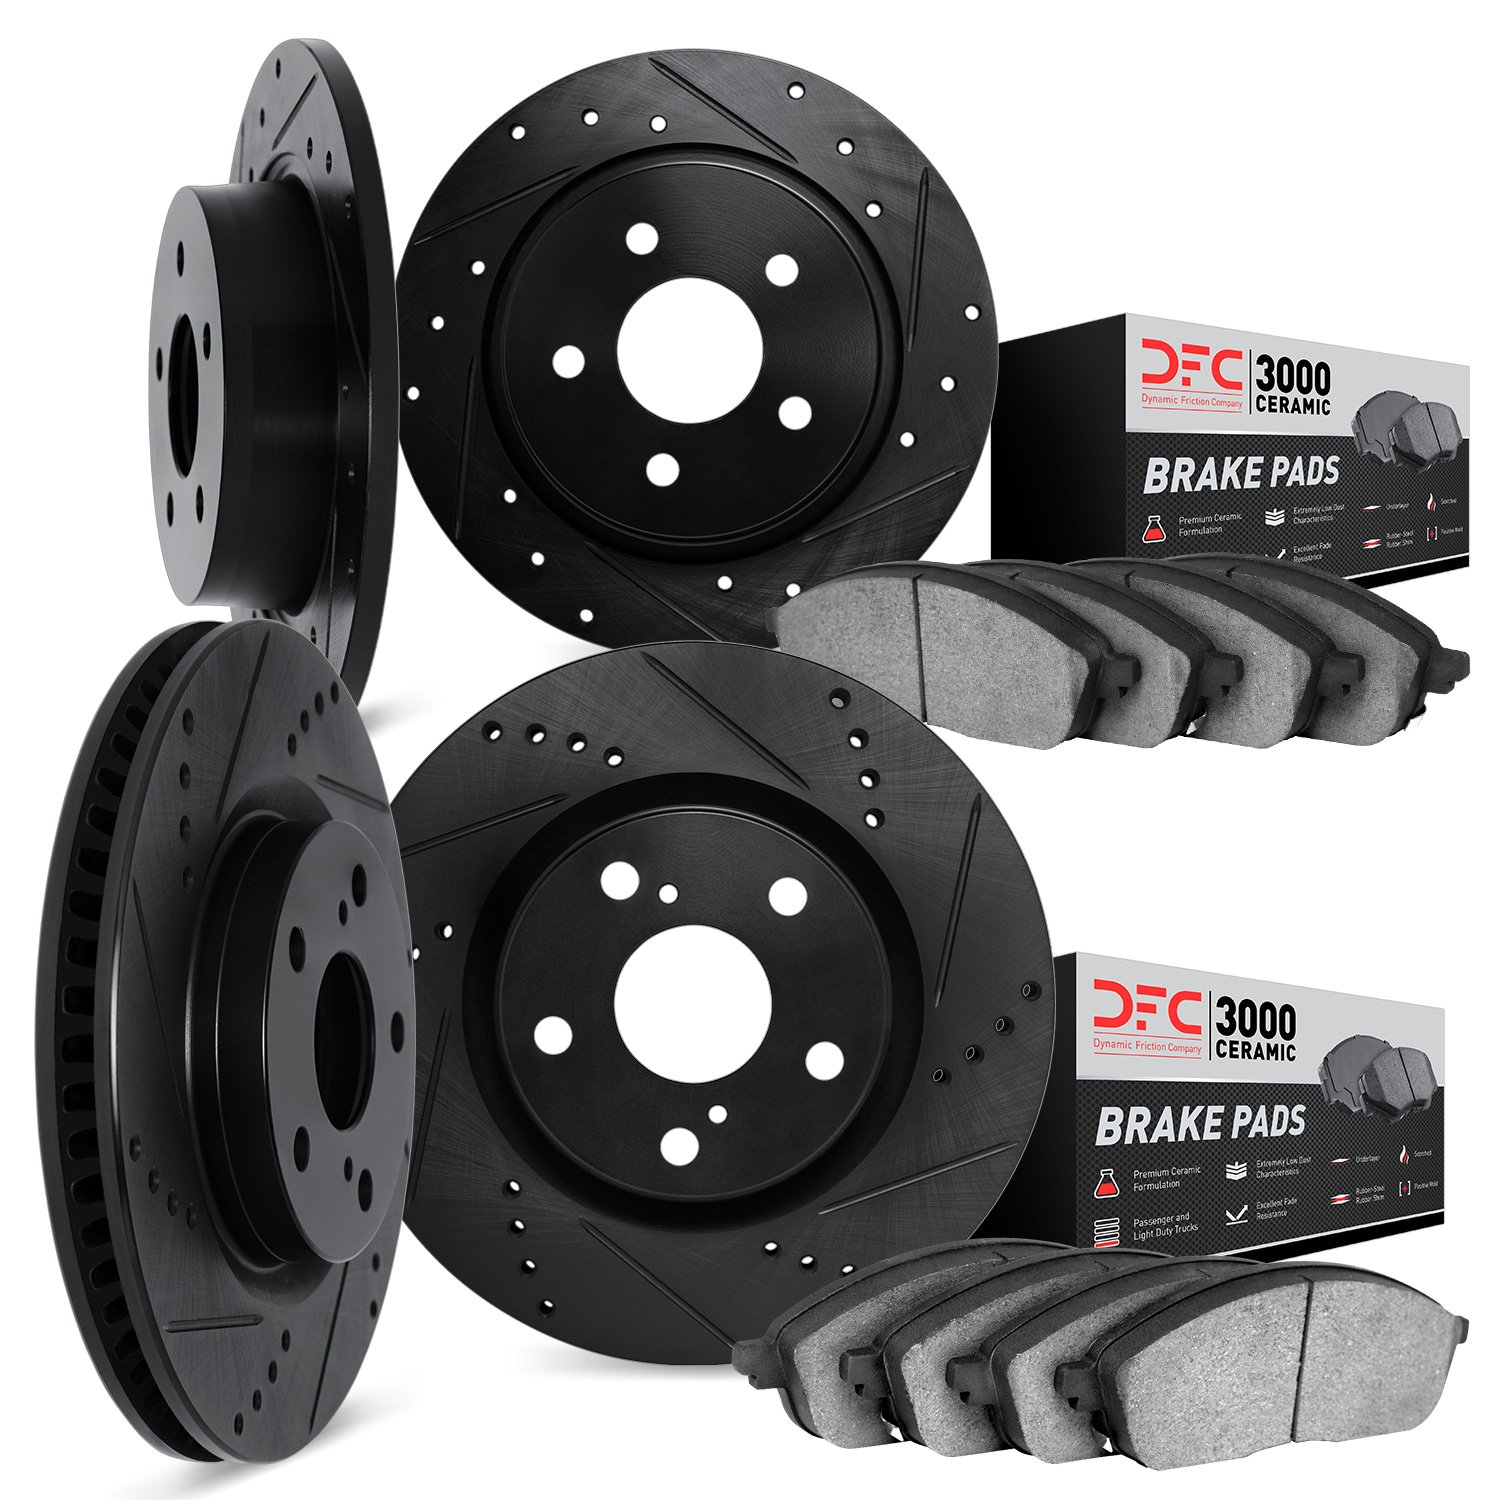 8304-42012 Drilled/Slotted Brake Rotors with 3000-Series Ceramic Brake Pads Kit [Black], 2007-2018 Mopar, Position: Front and Re